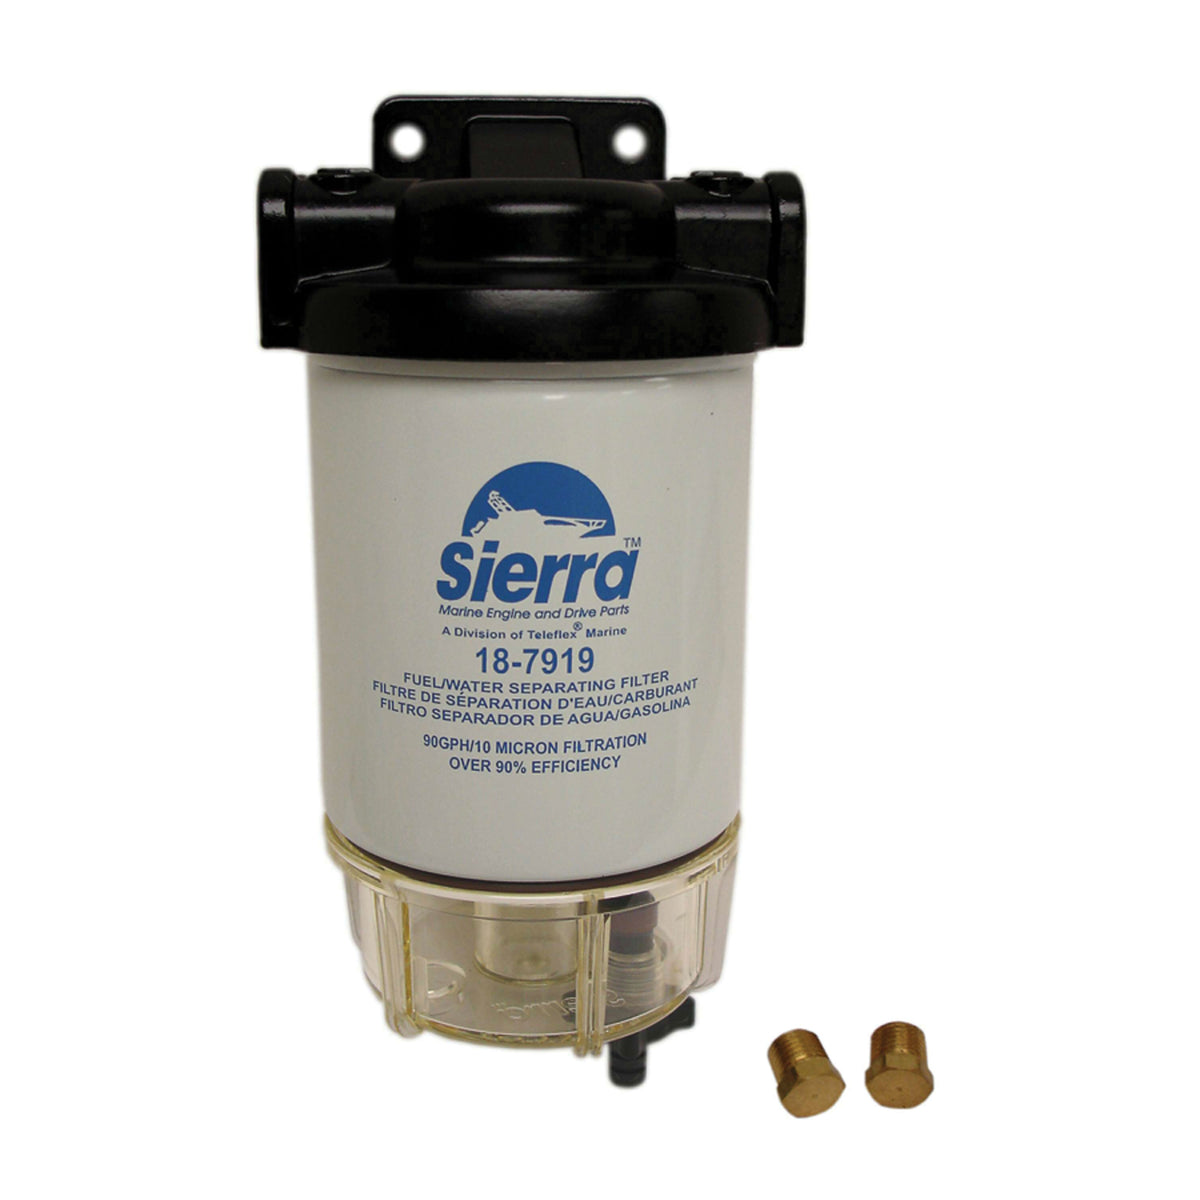 Sierra 18-7951 10 Micron Filter Kit - 1/4 in. Aluminum with Metal Collection Bowl